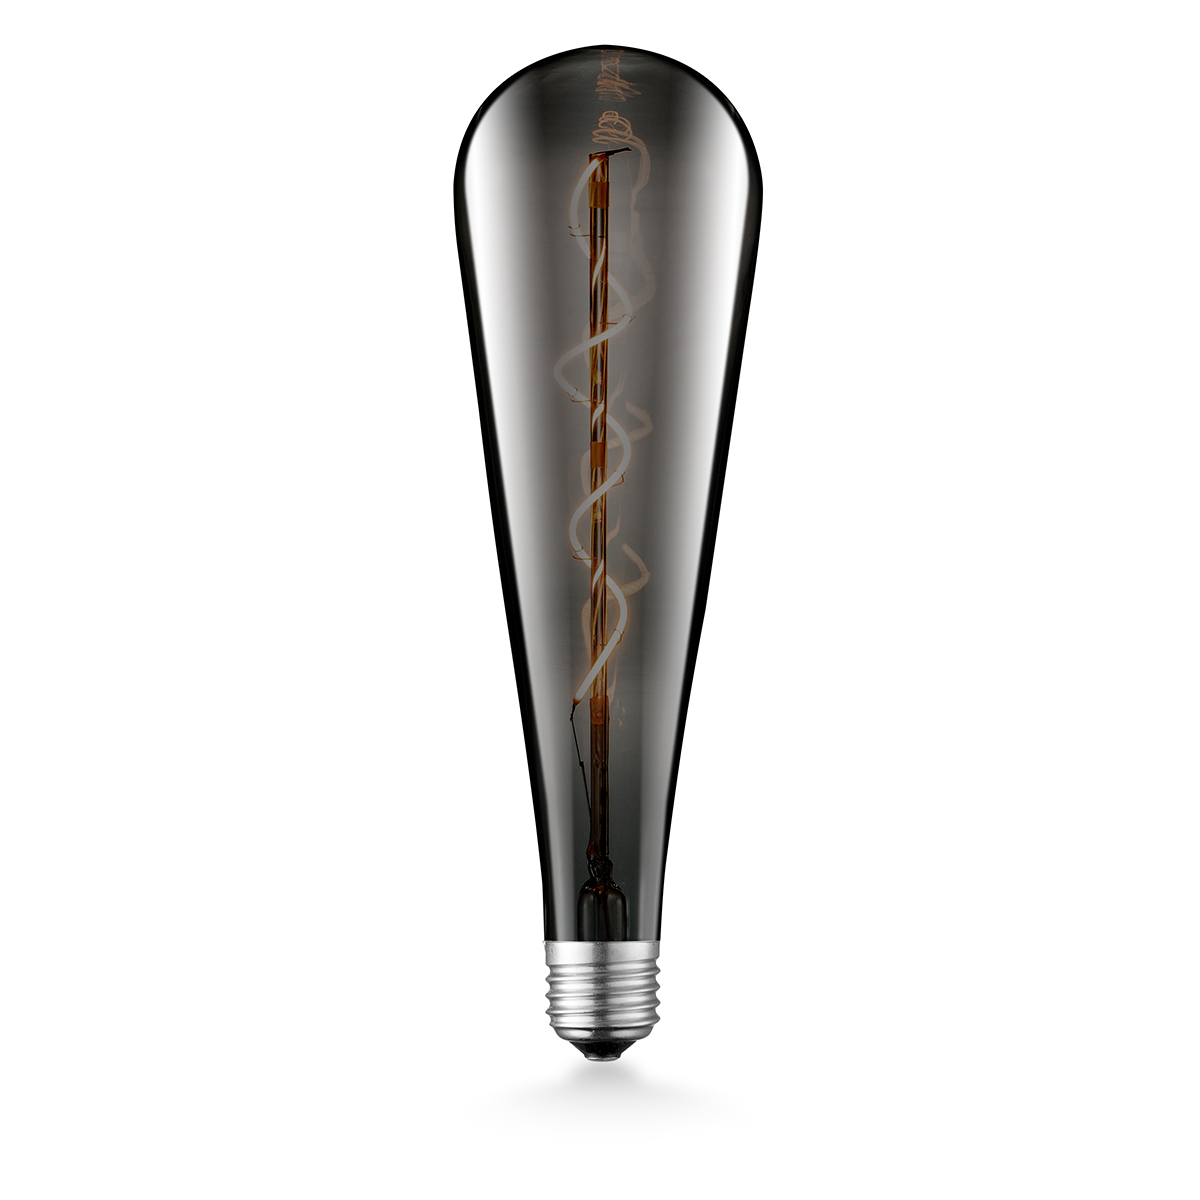 Tangla lighting - TLB-8033-04TM - LED Light Bulb Single Spiral filament - special 4W titanium - exclamation - dimmable - E27